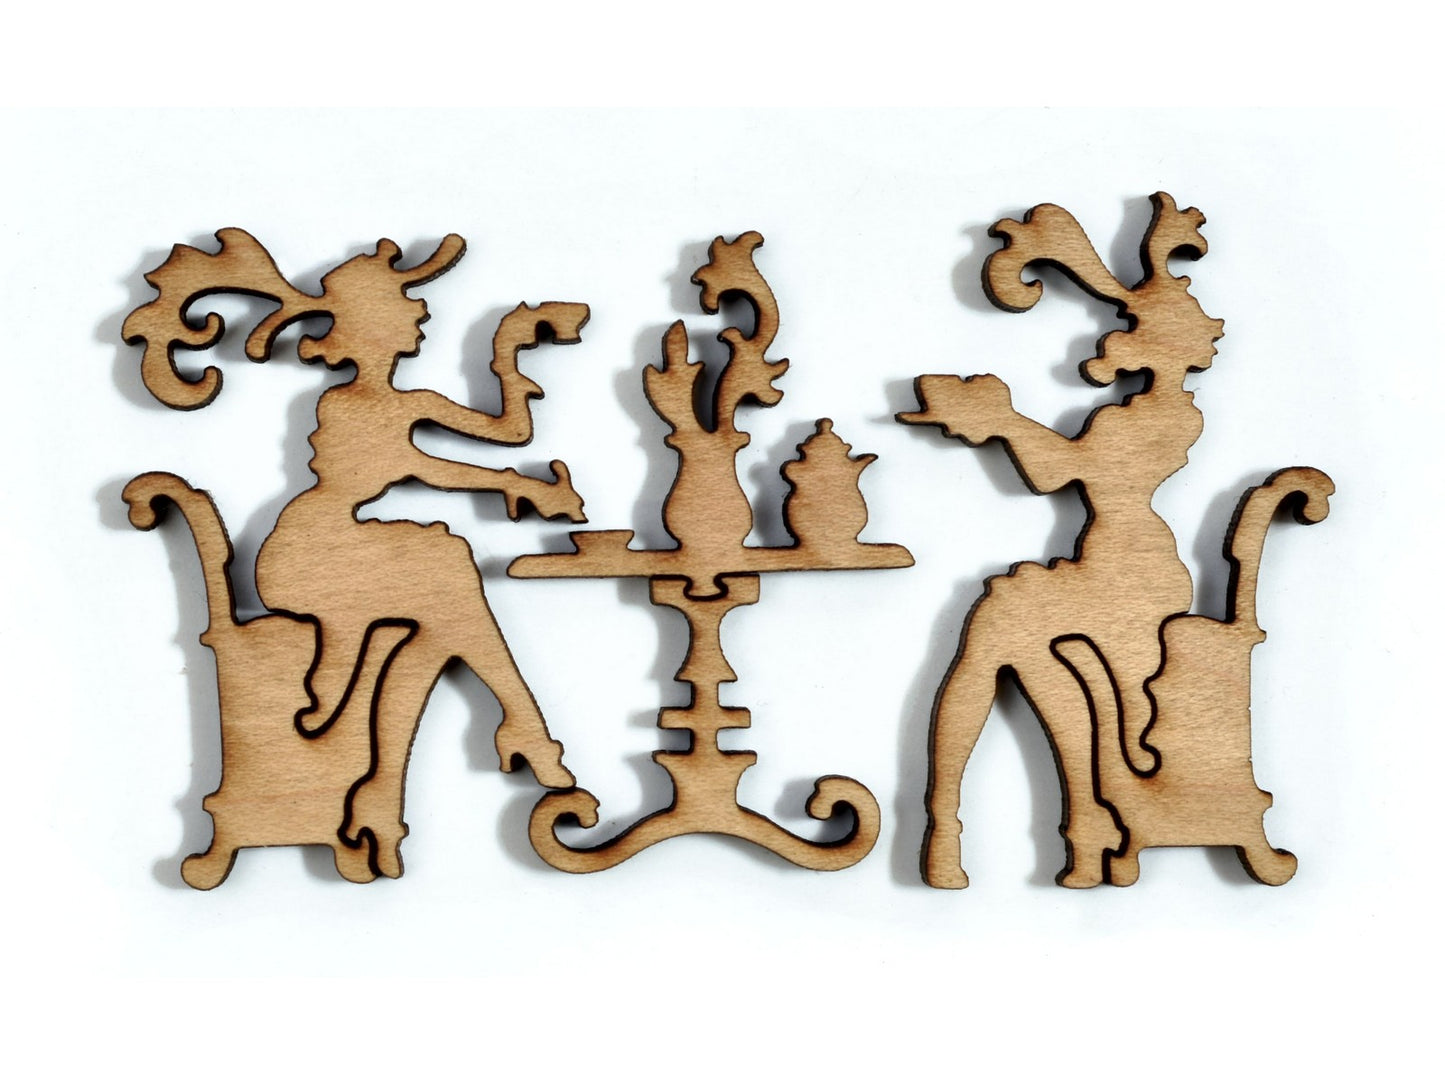 A closeup of pieces in the shape of a two people at a table having tea.